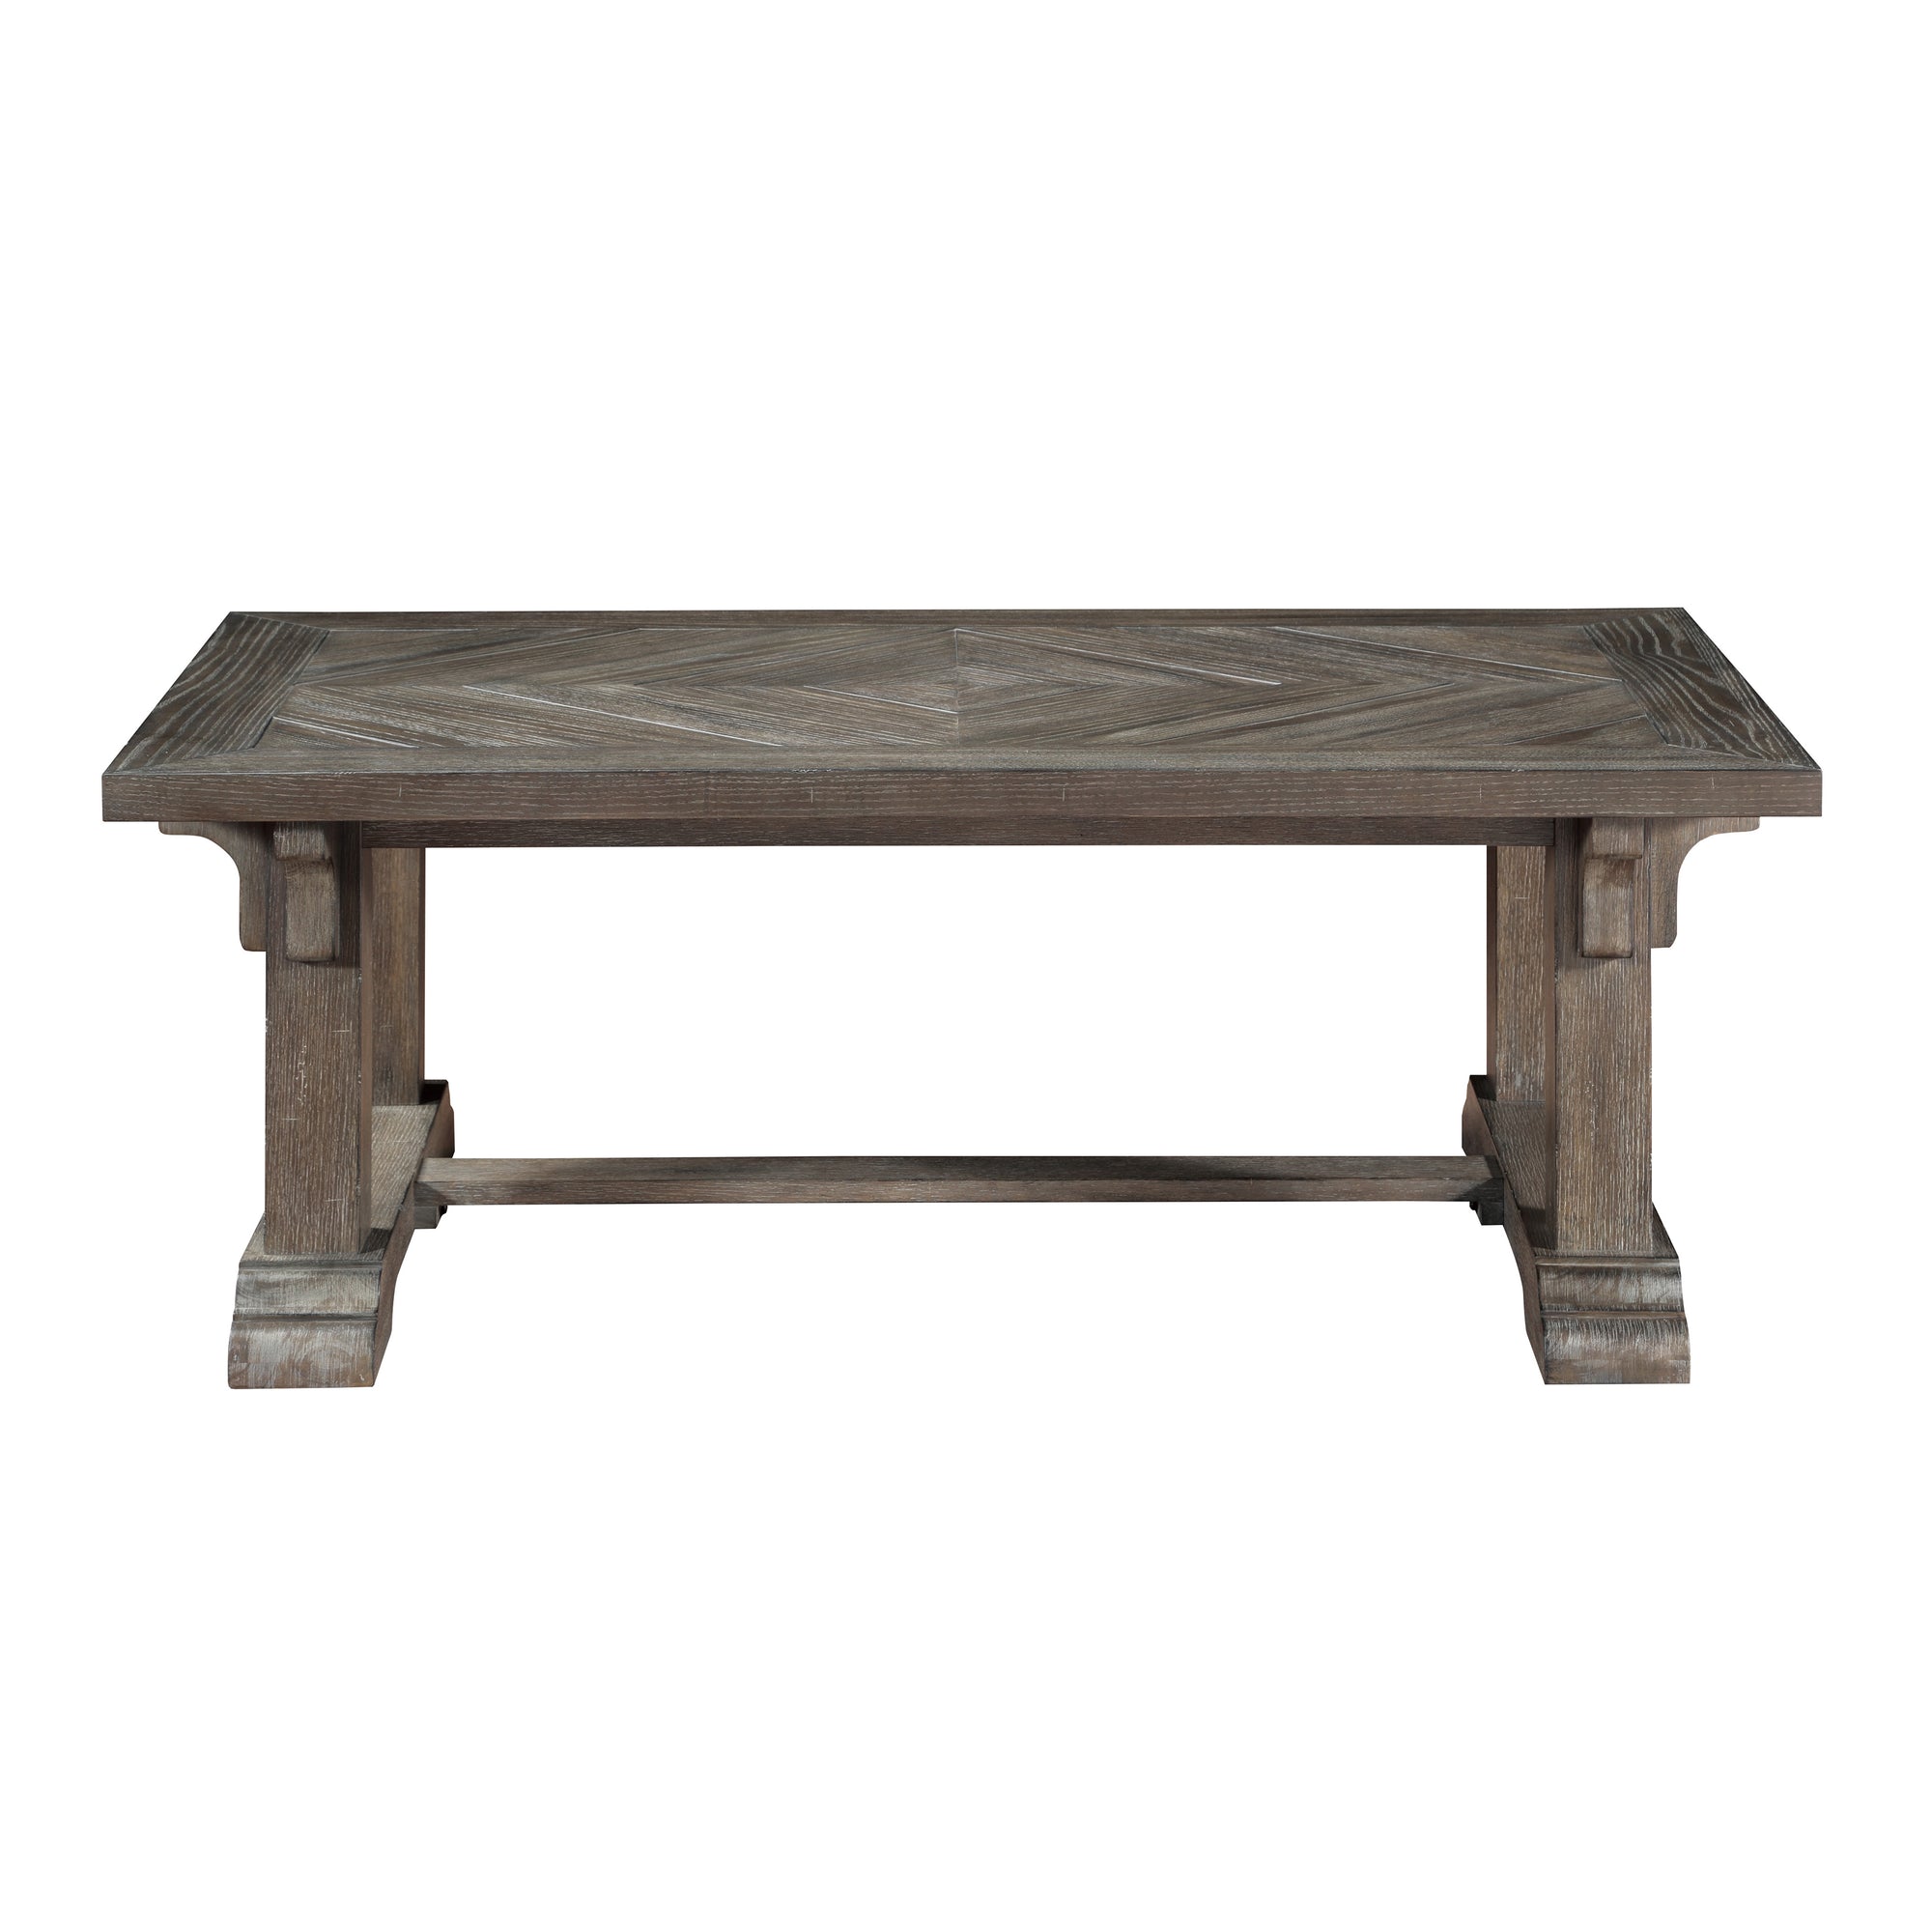 Grayling Downs Coffee Table